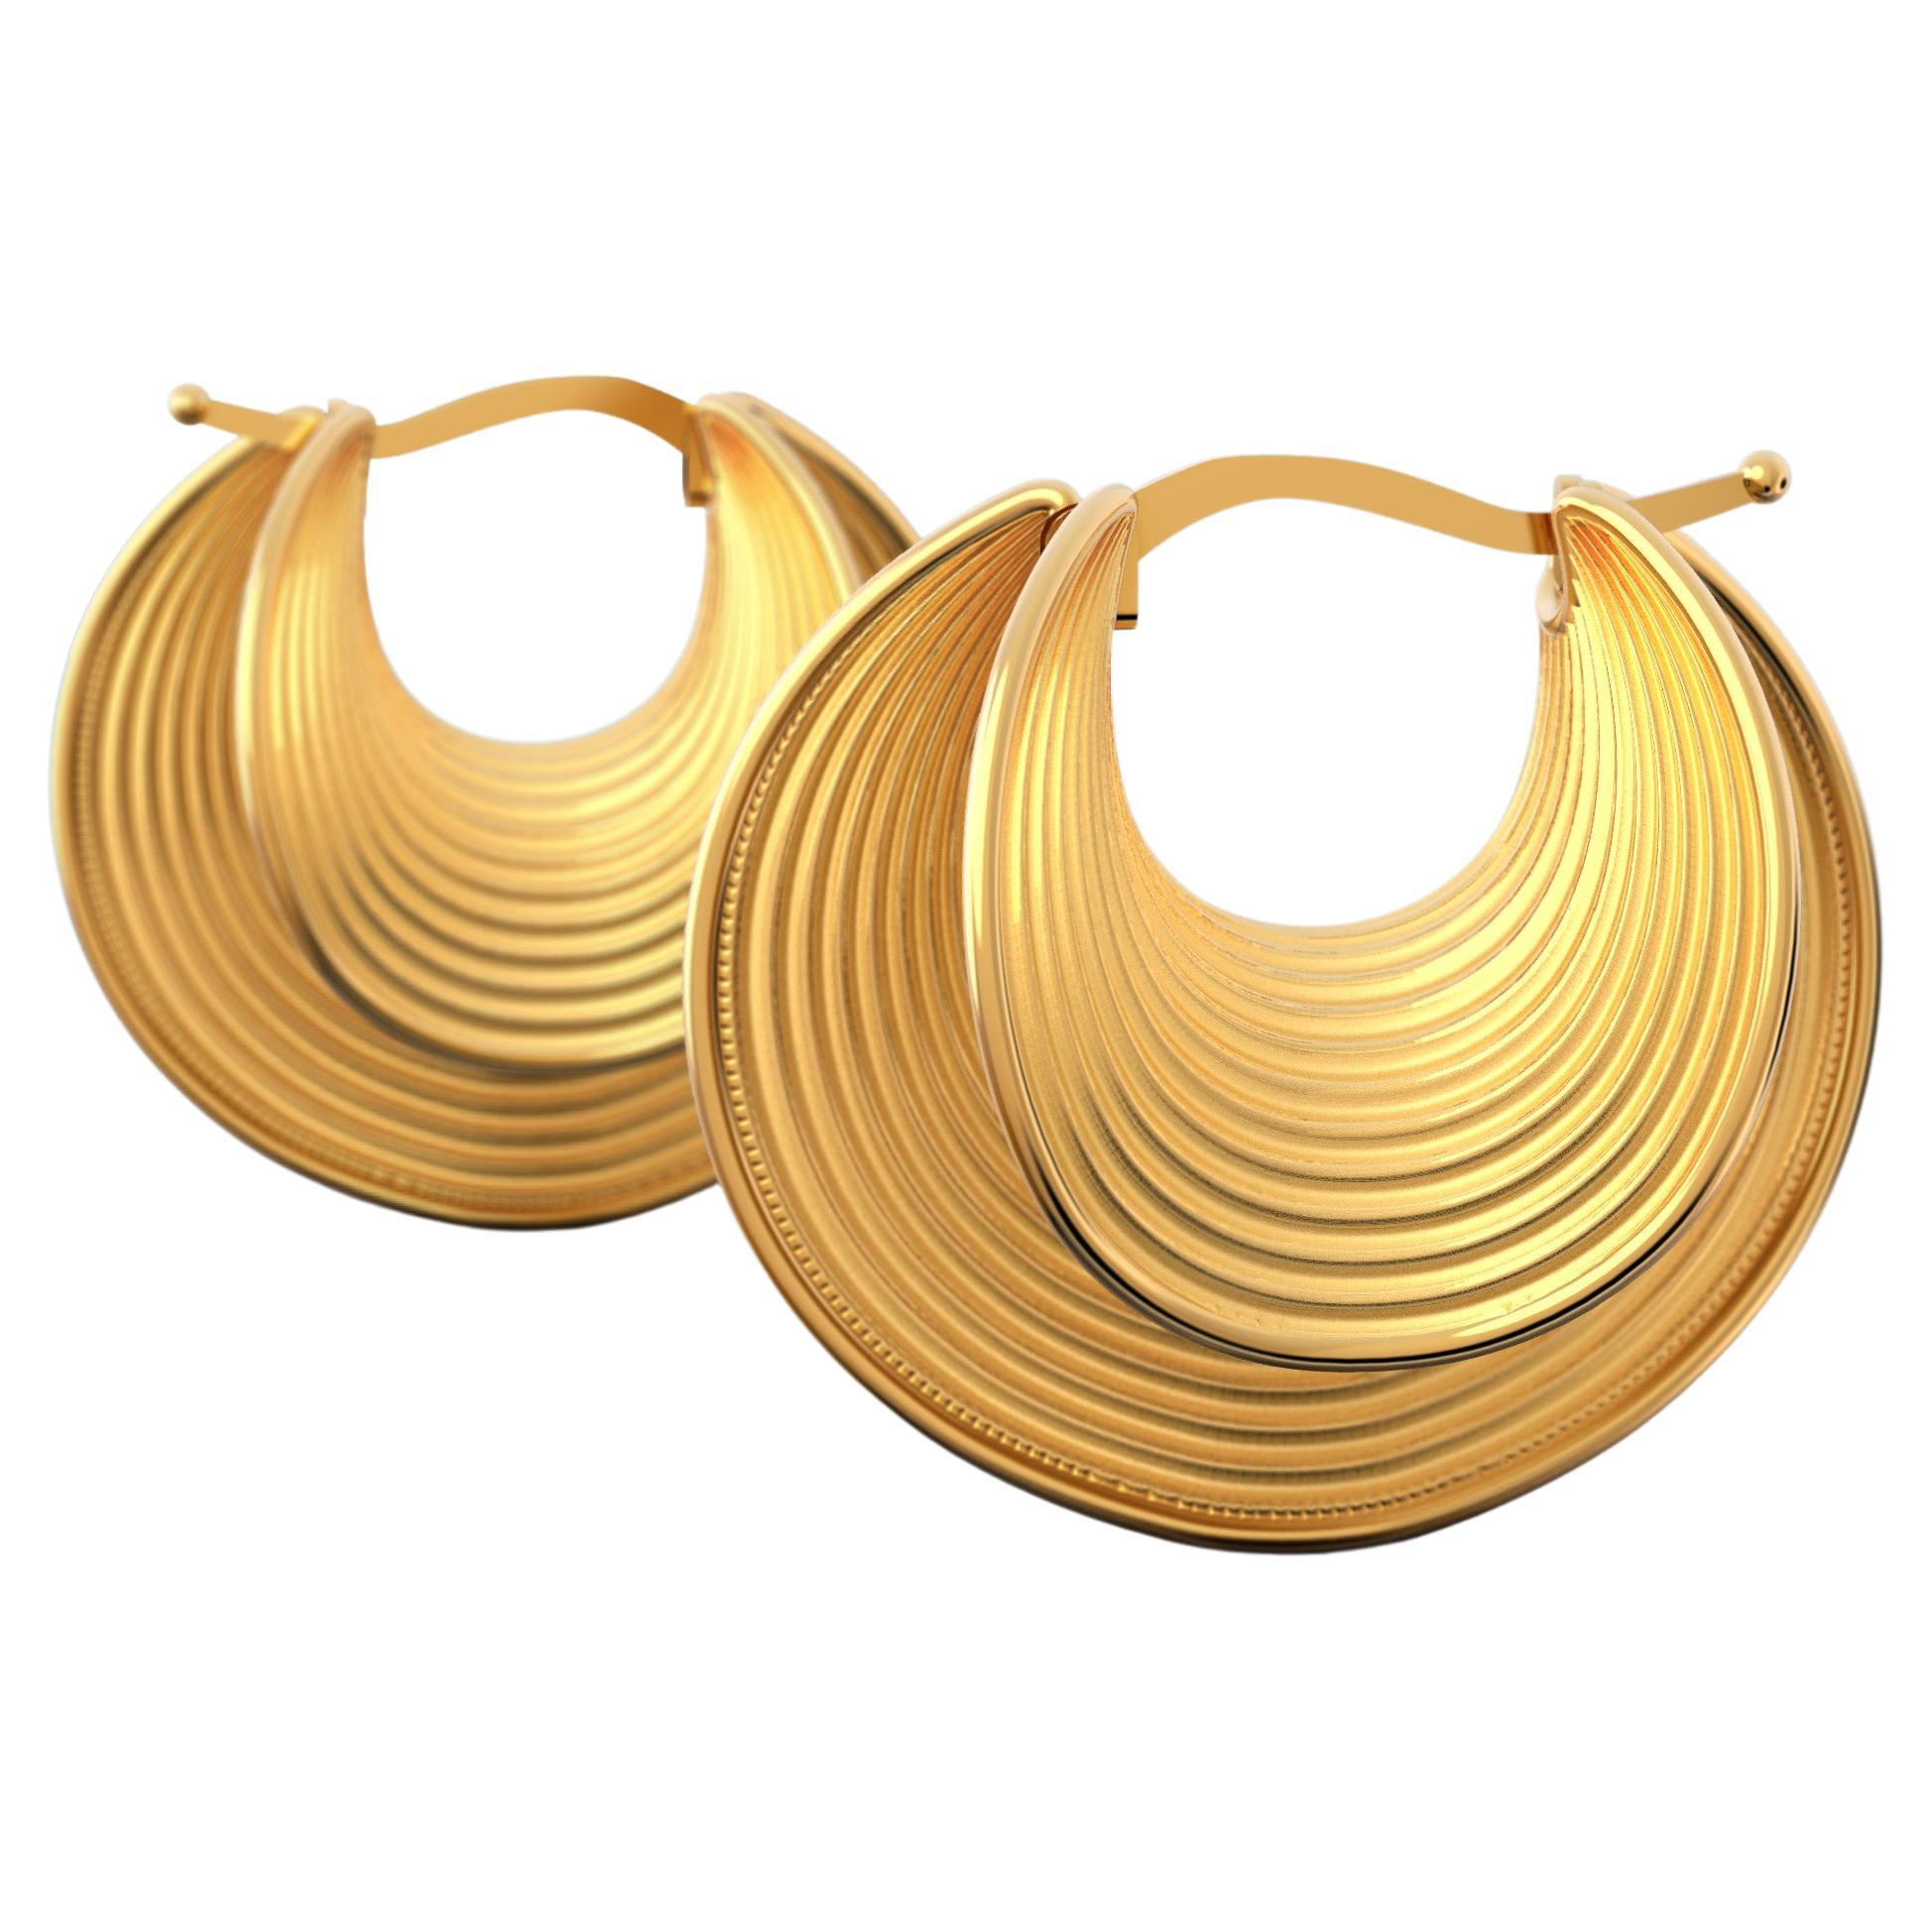 18k Gold Hoop Earrings, Oltremare Gioielli Gold Earrings Made in Italy For Sale